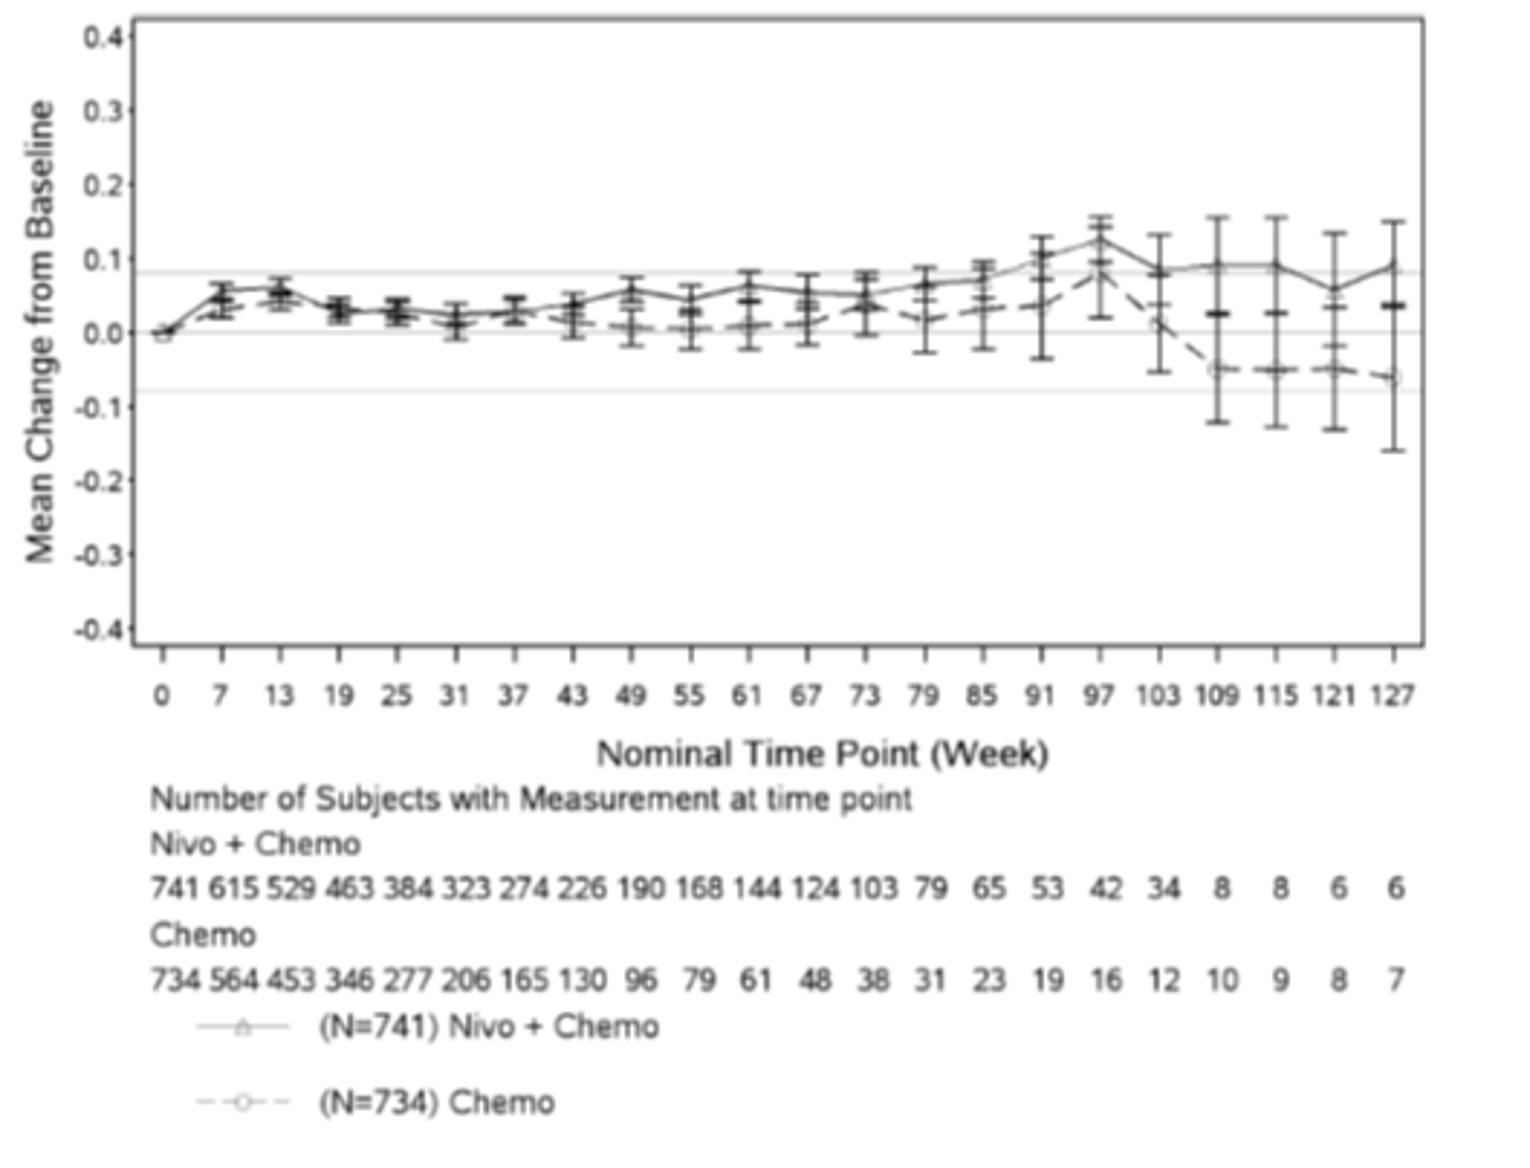 In this analysis of EQ-5D-3L utility index score mean change from baseline among all randomized patients in the CheckMate-649 trial, patients in both the nivolumab + chemotherapy and chemotherapy arms showed numerical improvements at all post-baseline assessments until week 103. The number of patients in the nivolumab plus chemotherapy arm with measurements at 0, 7, 13, 19, 25, 31, 37, 43, 49, 55, 61, 67, 73, 79, 85, 91, 97, 103, 109, 115, 121, and 127 weeks was 741, 615, 529, 463, 384, 323, 274, 226, 190, 168, 144, 124, 103, 79, 65, 53, 42, 34, 8, 8, 6, and 6, respectively. The number of patients in the chemotherapy arm with measurements at 0, 7, 13, 19, 25, 31, 37, 43, 49, 55, 61, 67, 73, 79, 85, 91, 97, 103, 109, 115, 121, and 127 weeks was 734, 564, 453, 346, 277, 206, 165, 130, 96, 79, 61, 48, 38, 31, 23, 19, 16, 12, 10, 9, 8, and 7, respectively.